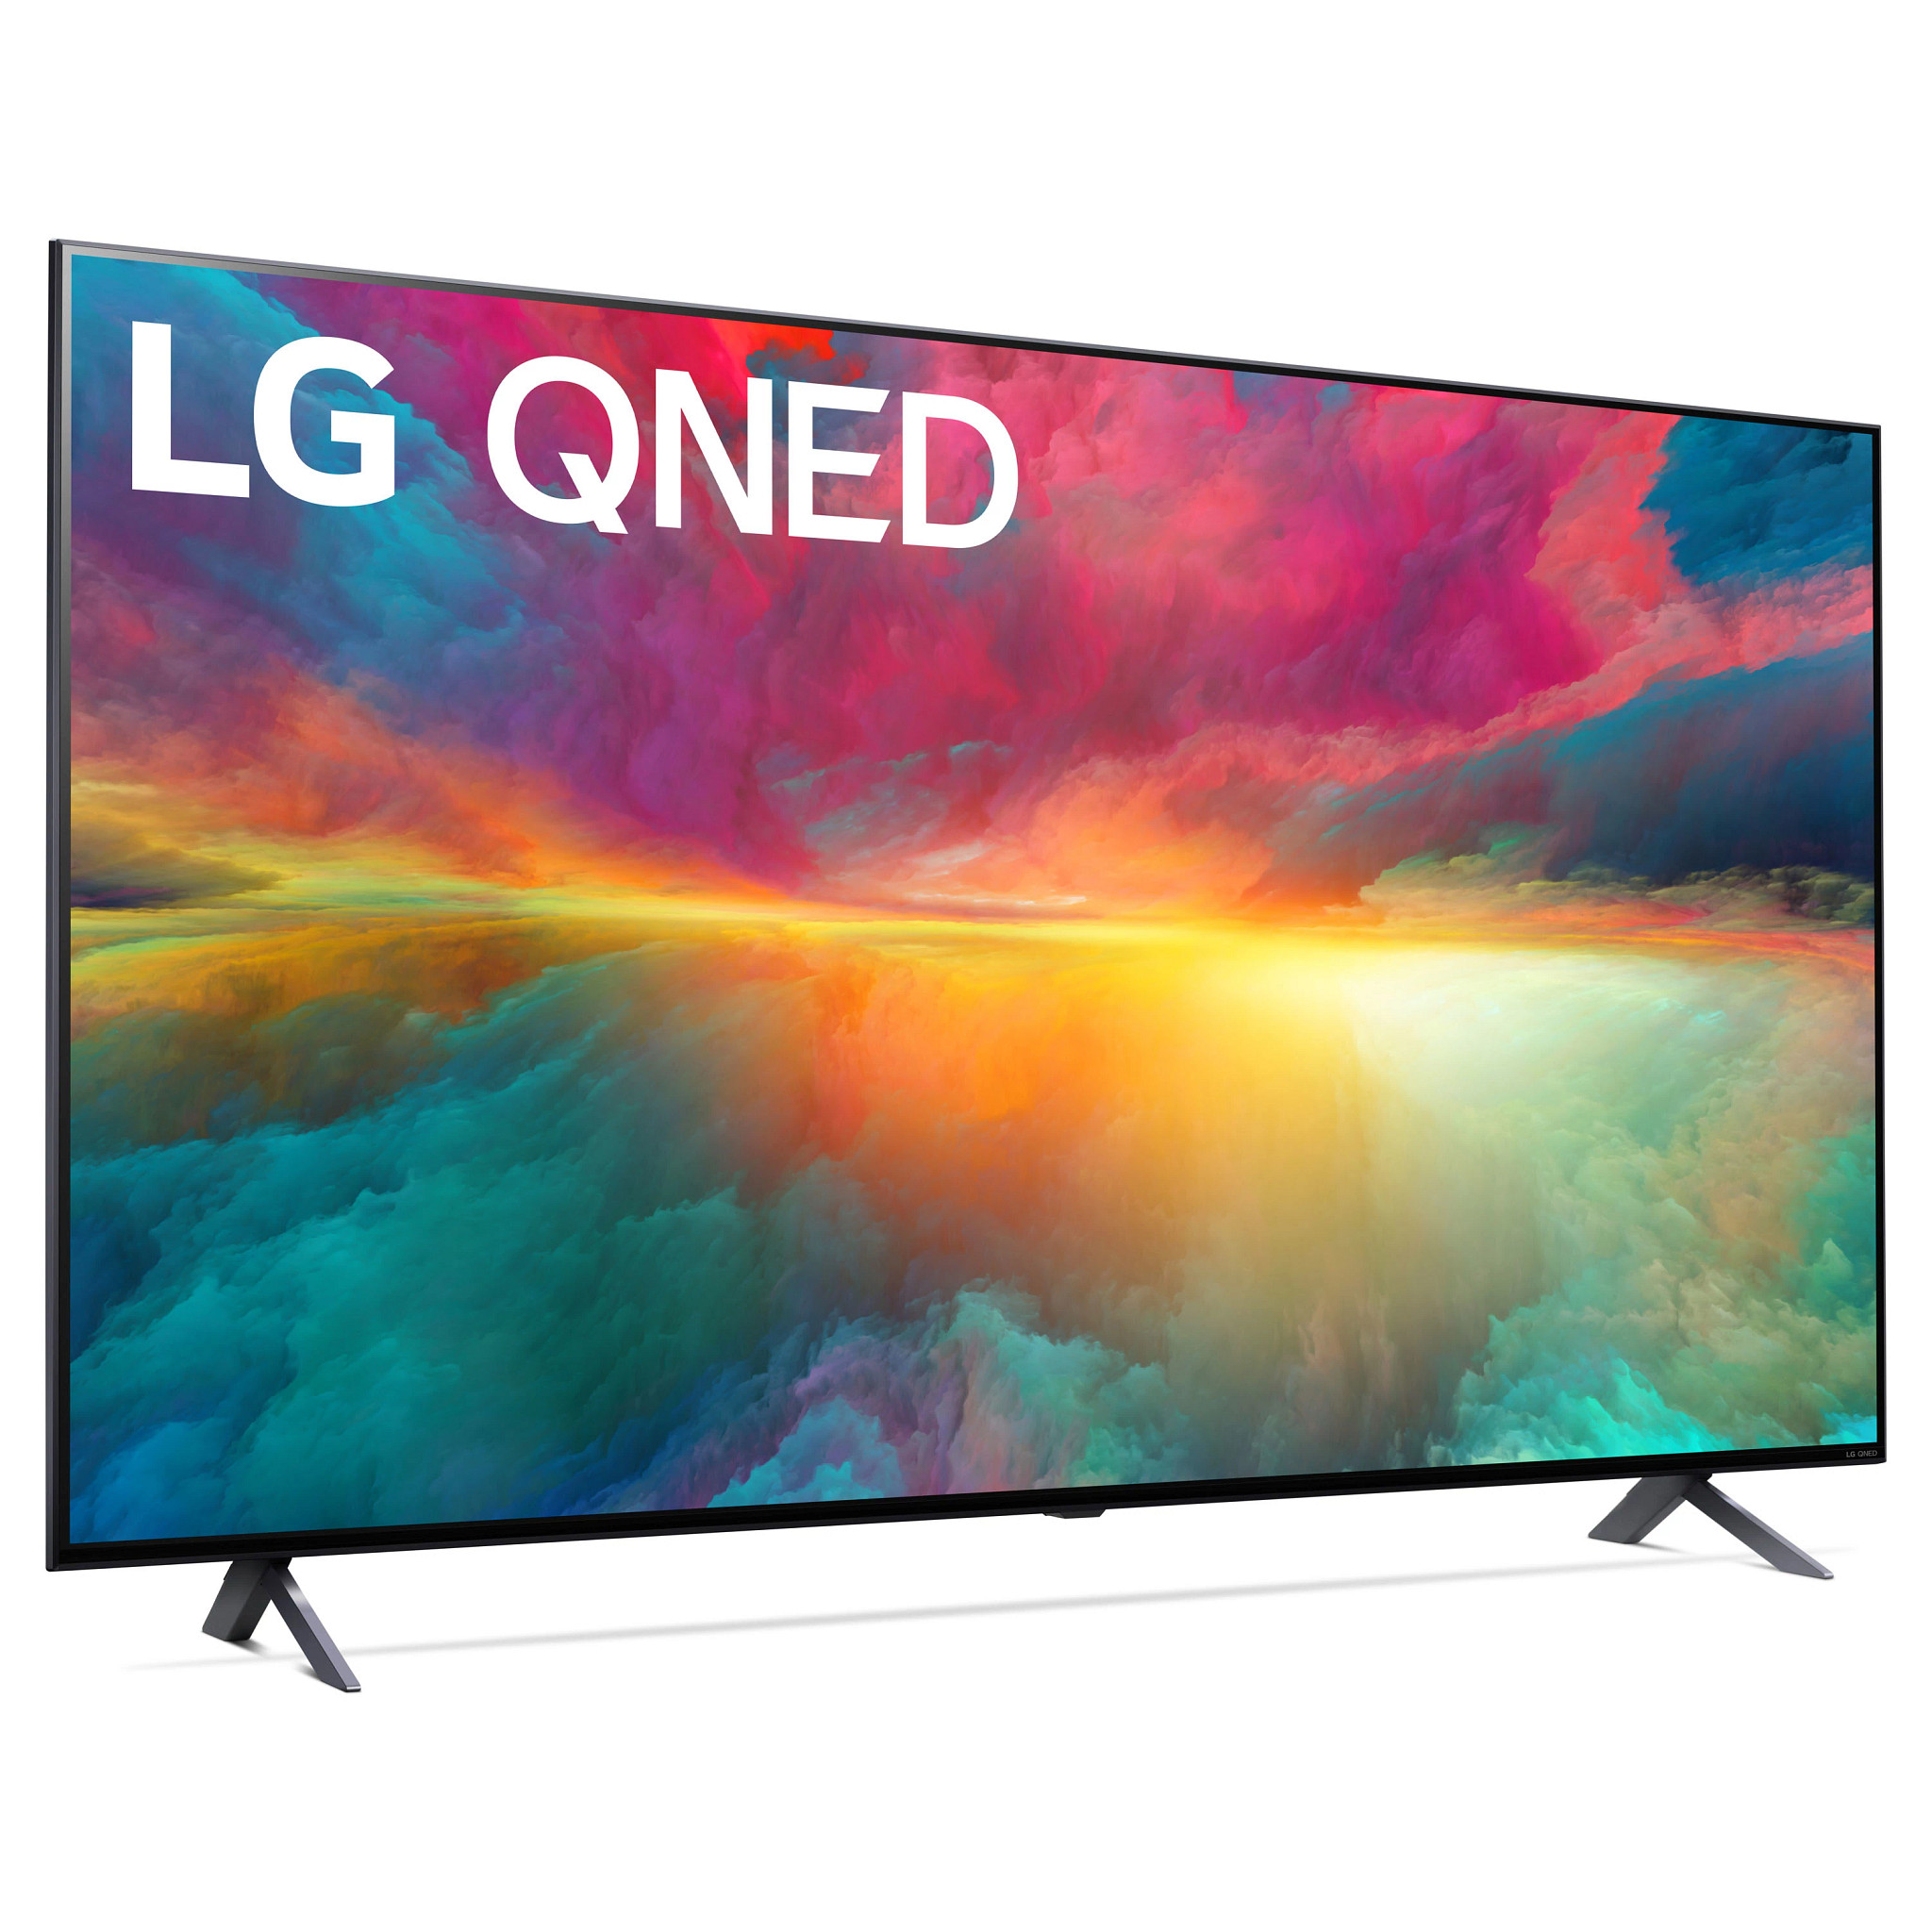 LG 75 inch Class 4K UHD QNED Web OS Smart TV with HDR 75 Series (75QNED75URA) - image 3 of 7